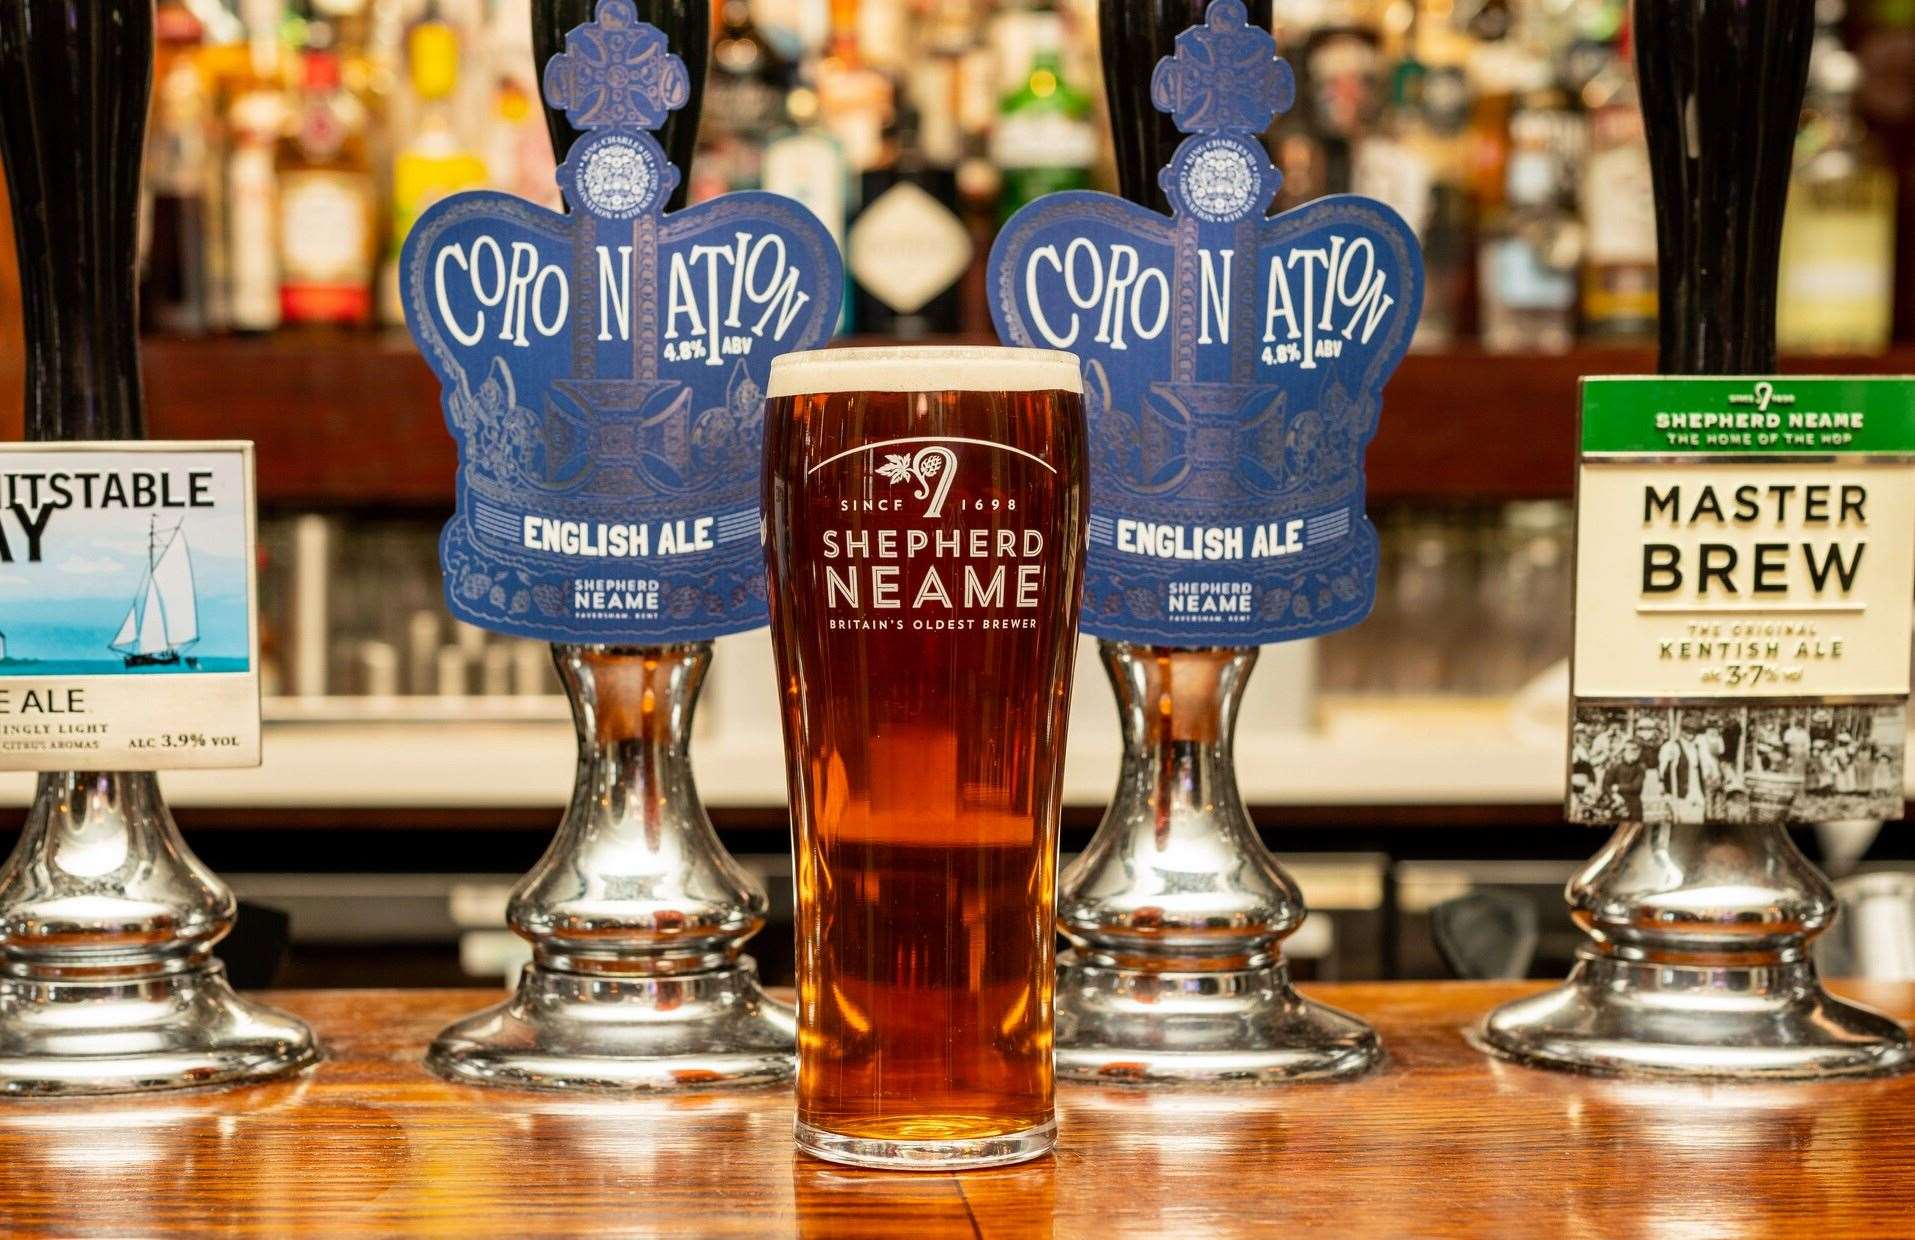 As pubs open later, brewer Shepherd Neame is among those to have a limited edition ale. Picture: Shepherd Neame.